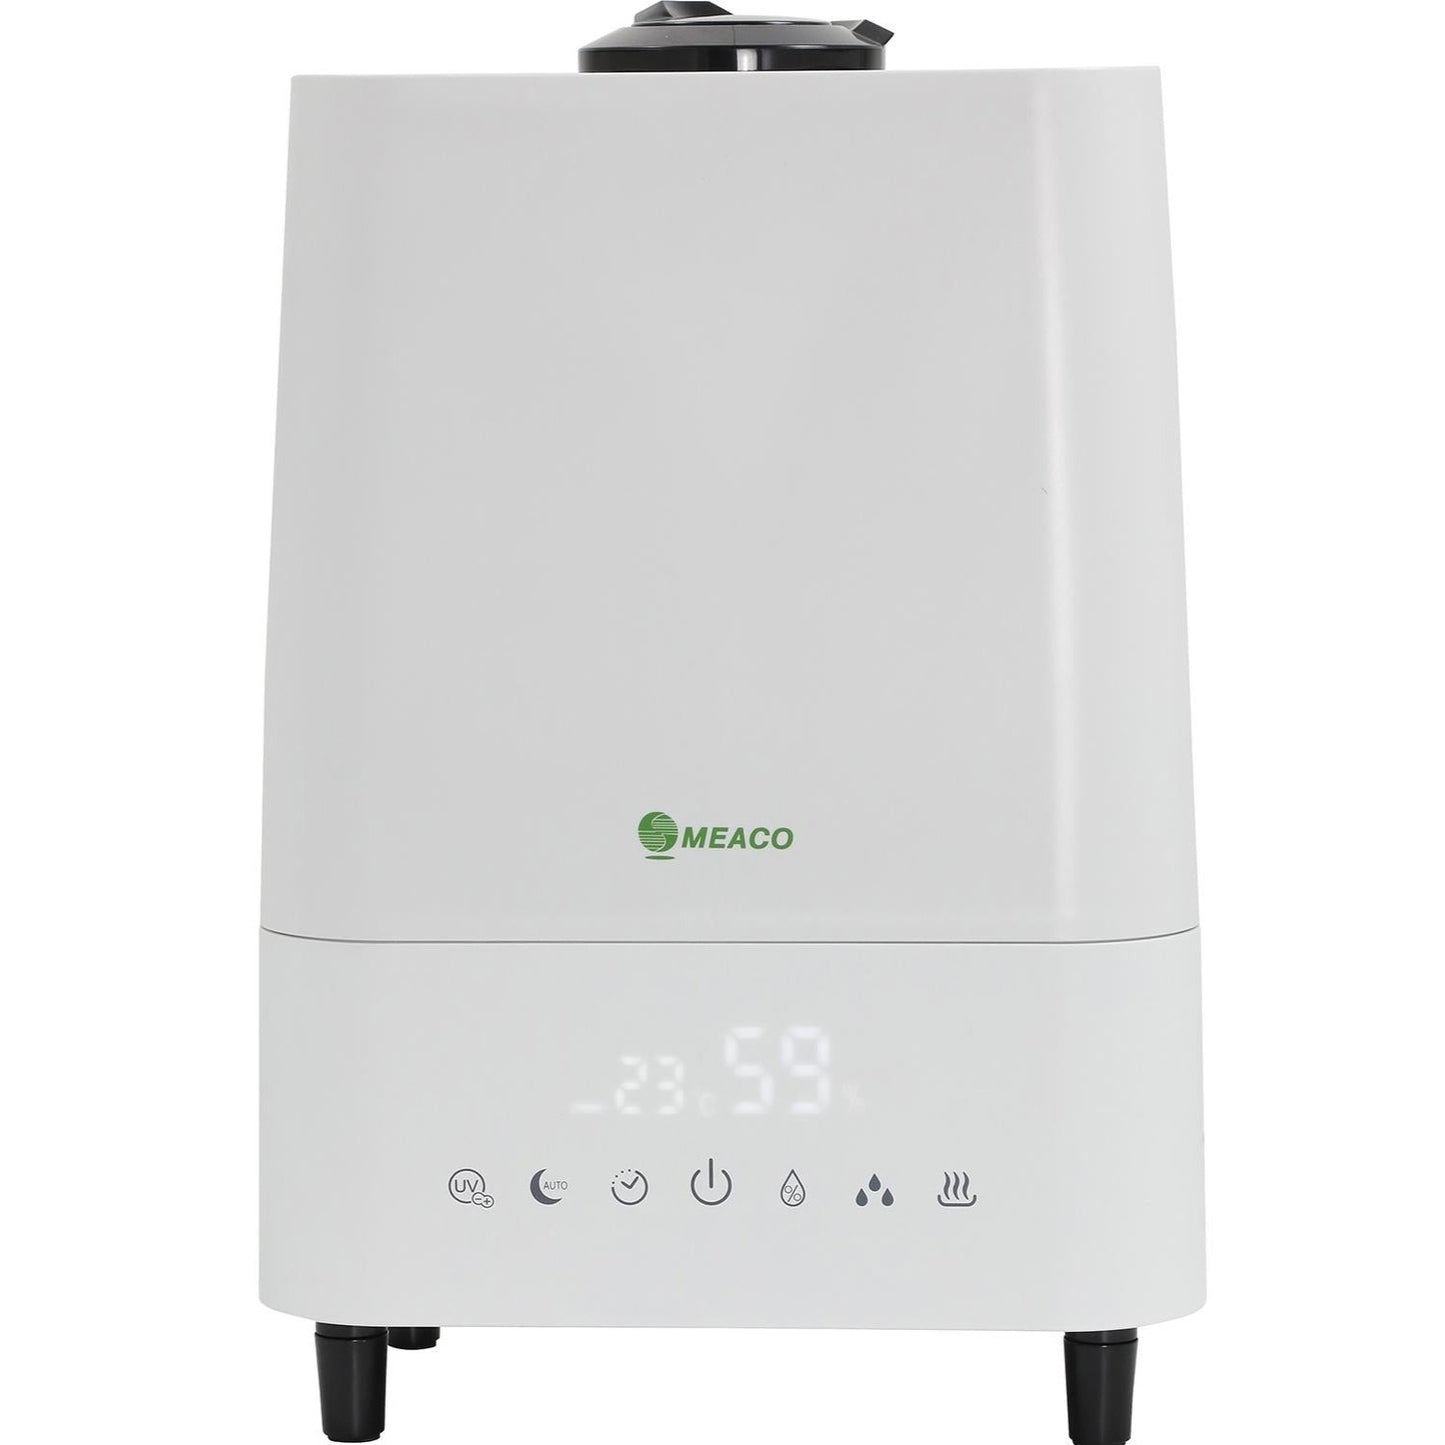 Meaco Deluxe 202 Ultrasonic Humidifier and Air Purifier